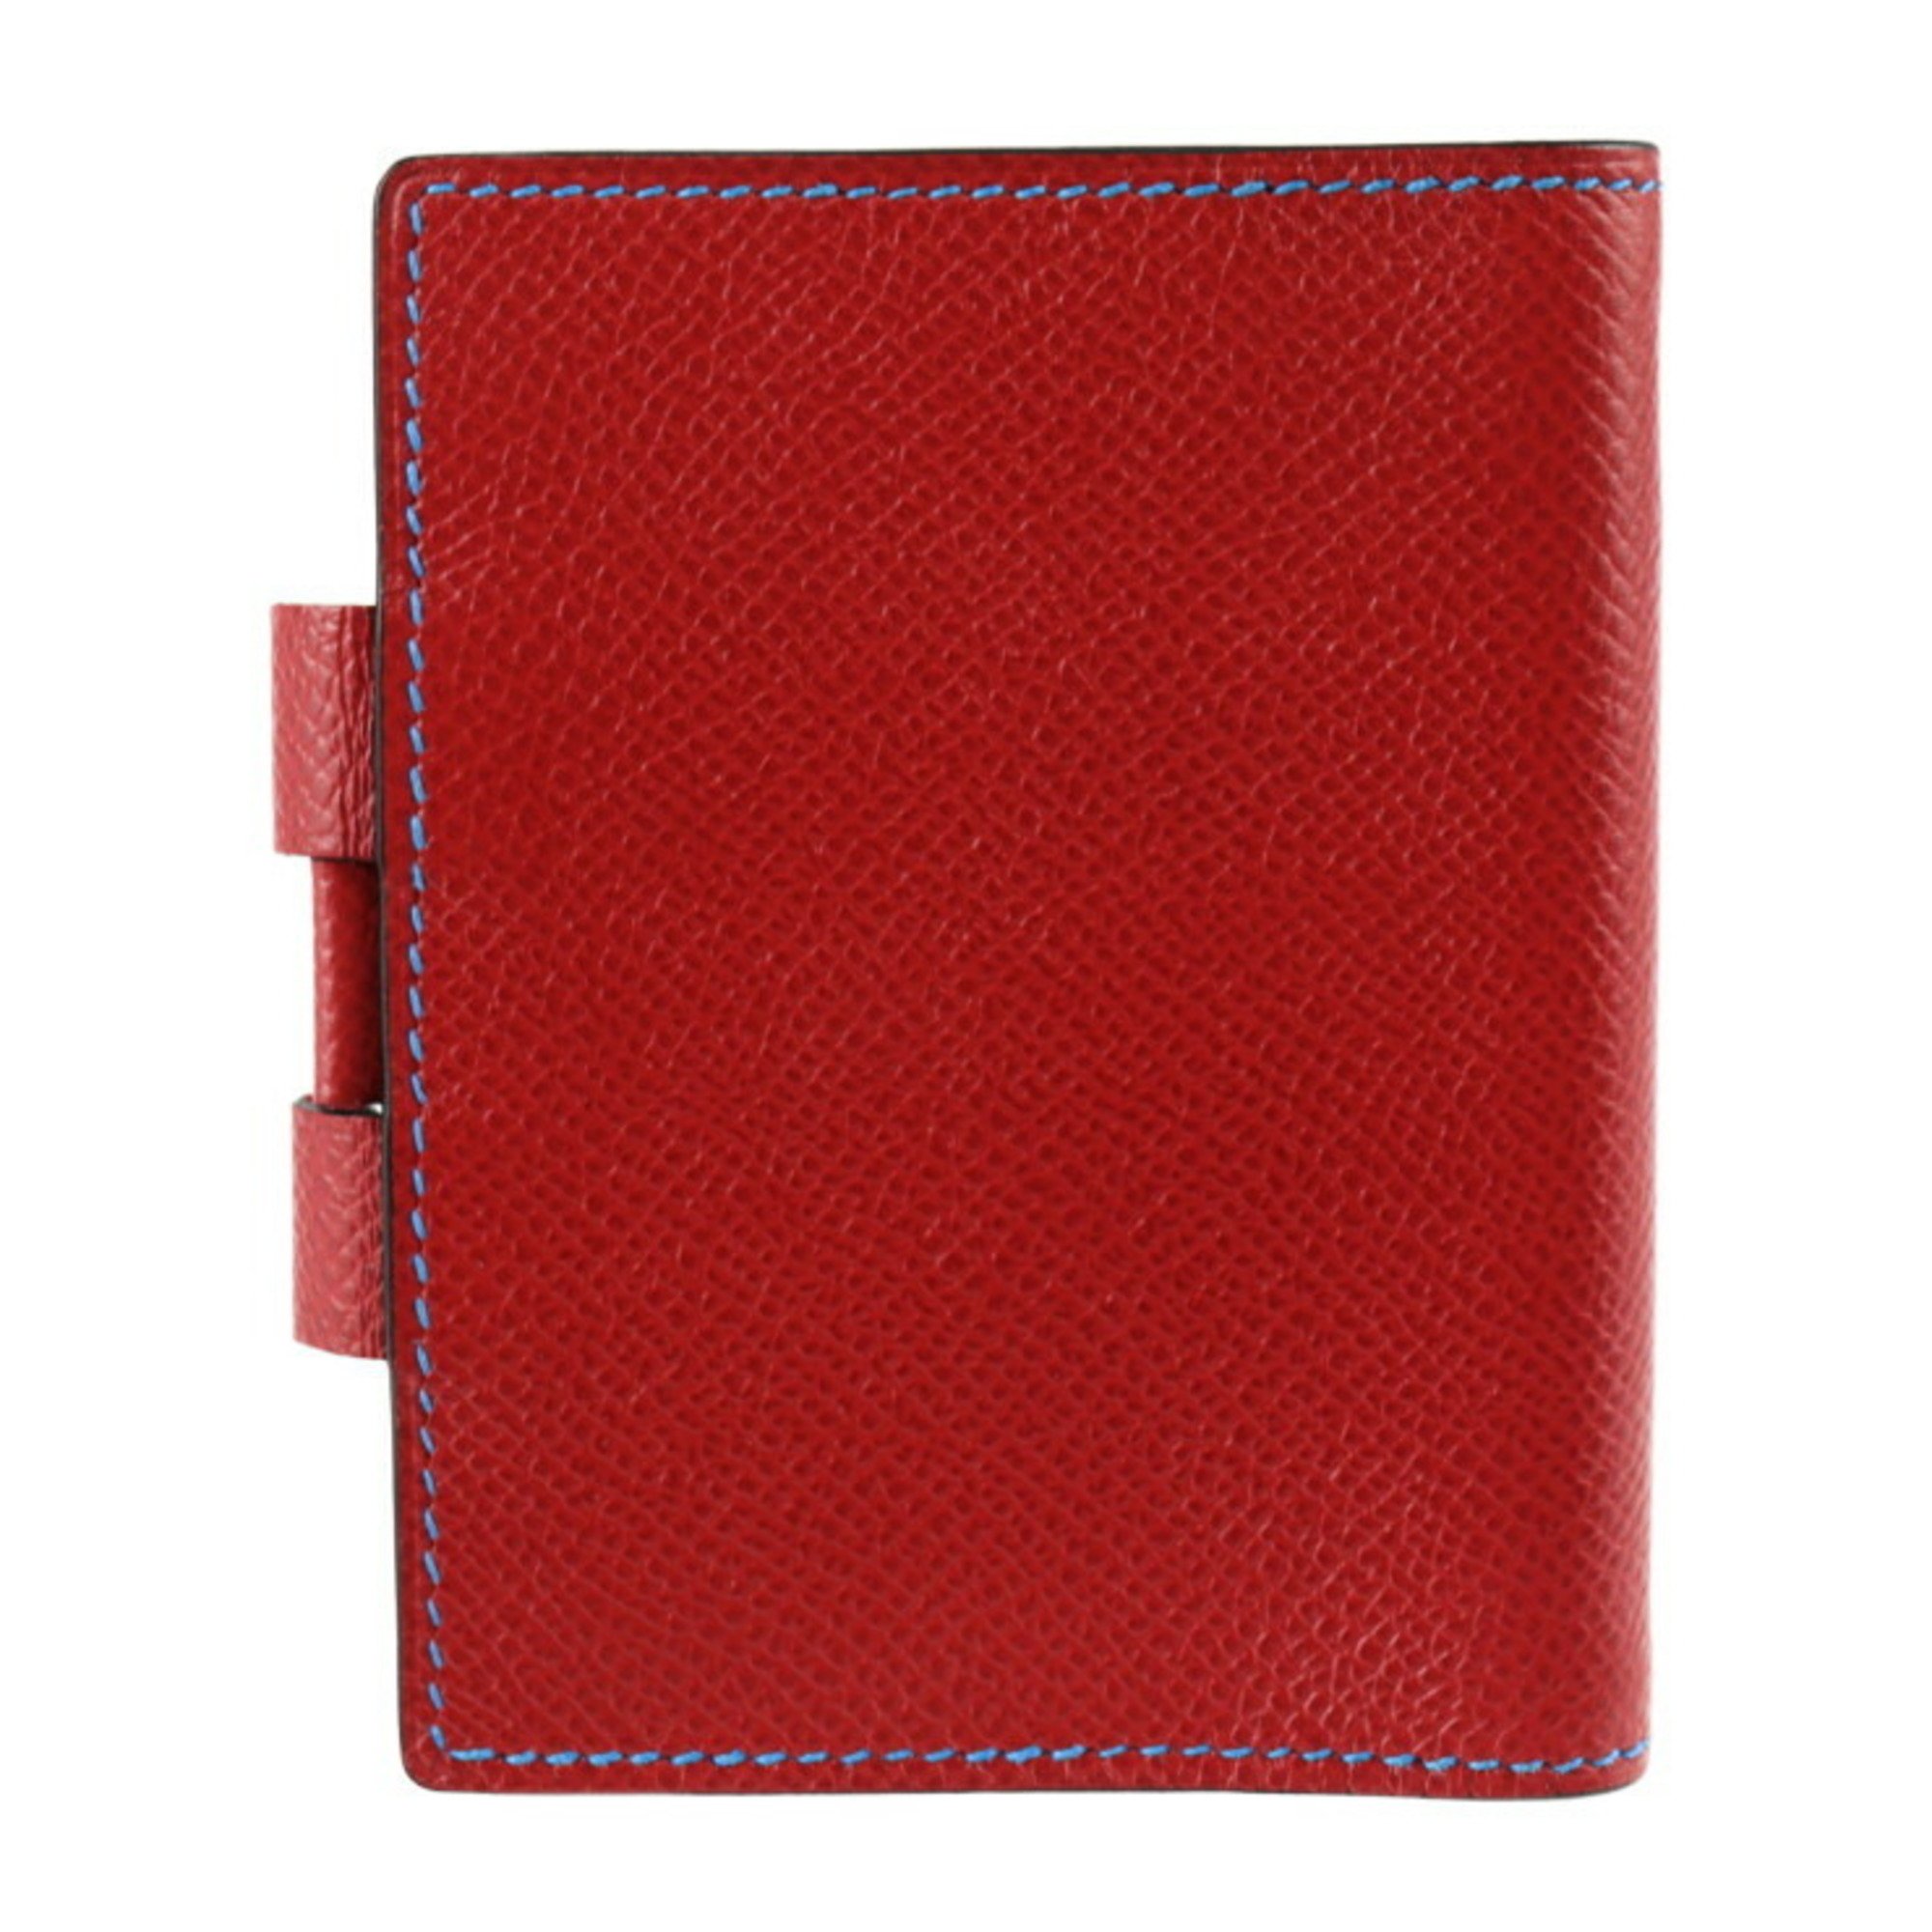 HERMES Agenda PM Notebook Cover Couchevel Red Blue □A engraved